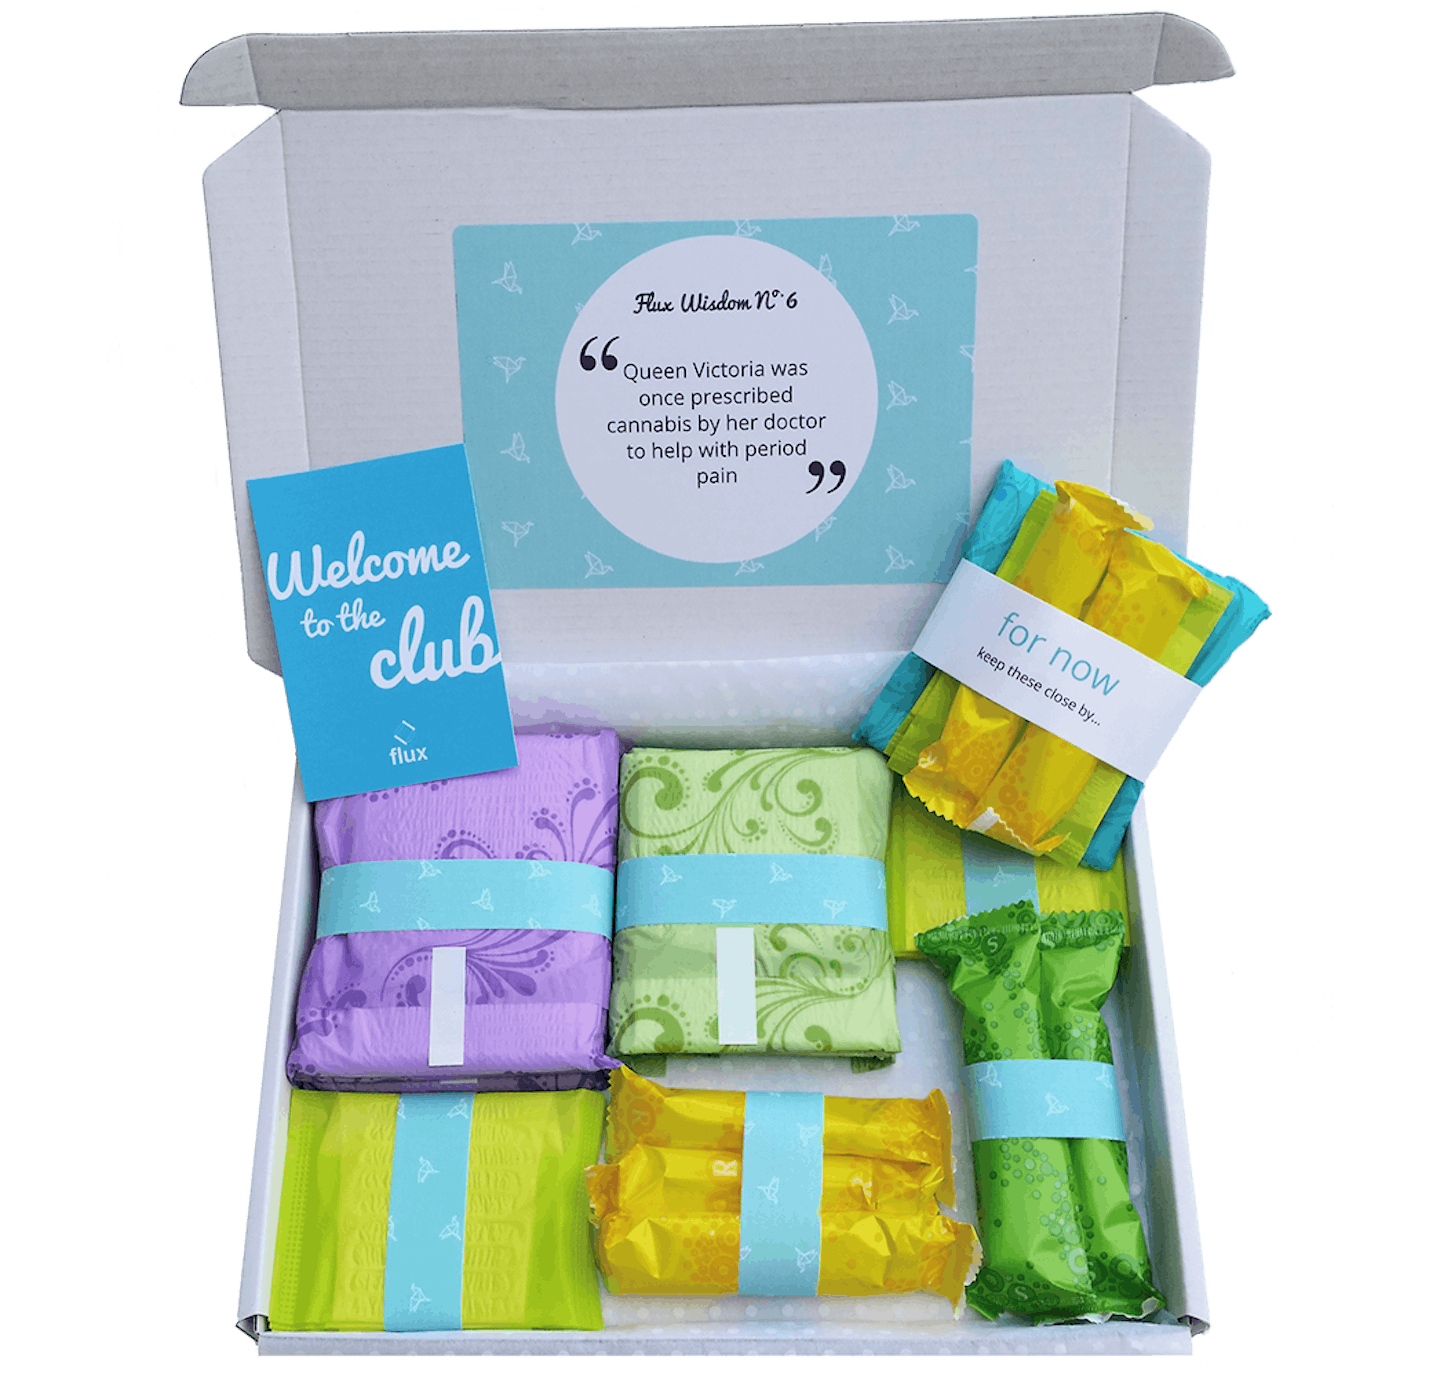 Flux Subscription Boxes, from £3.50 per box